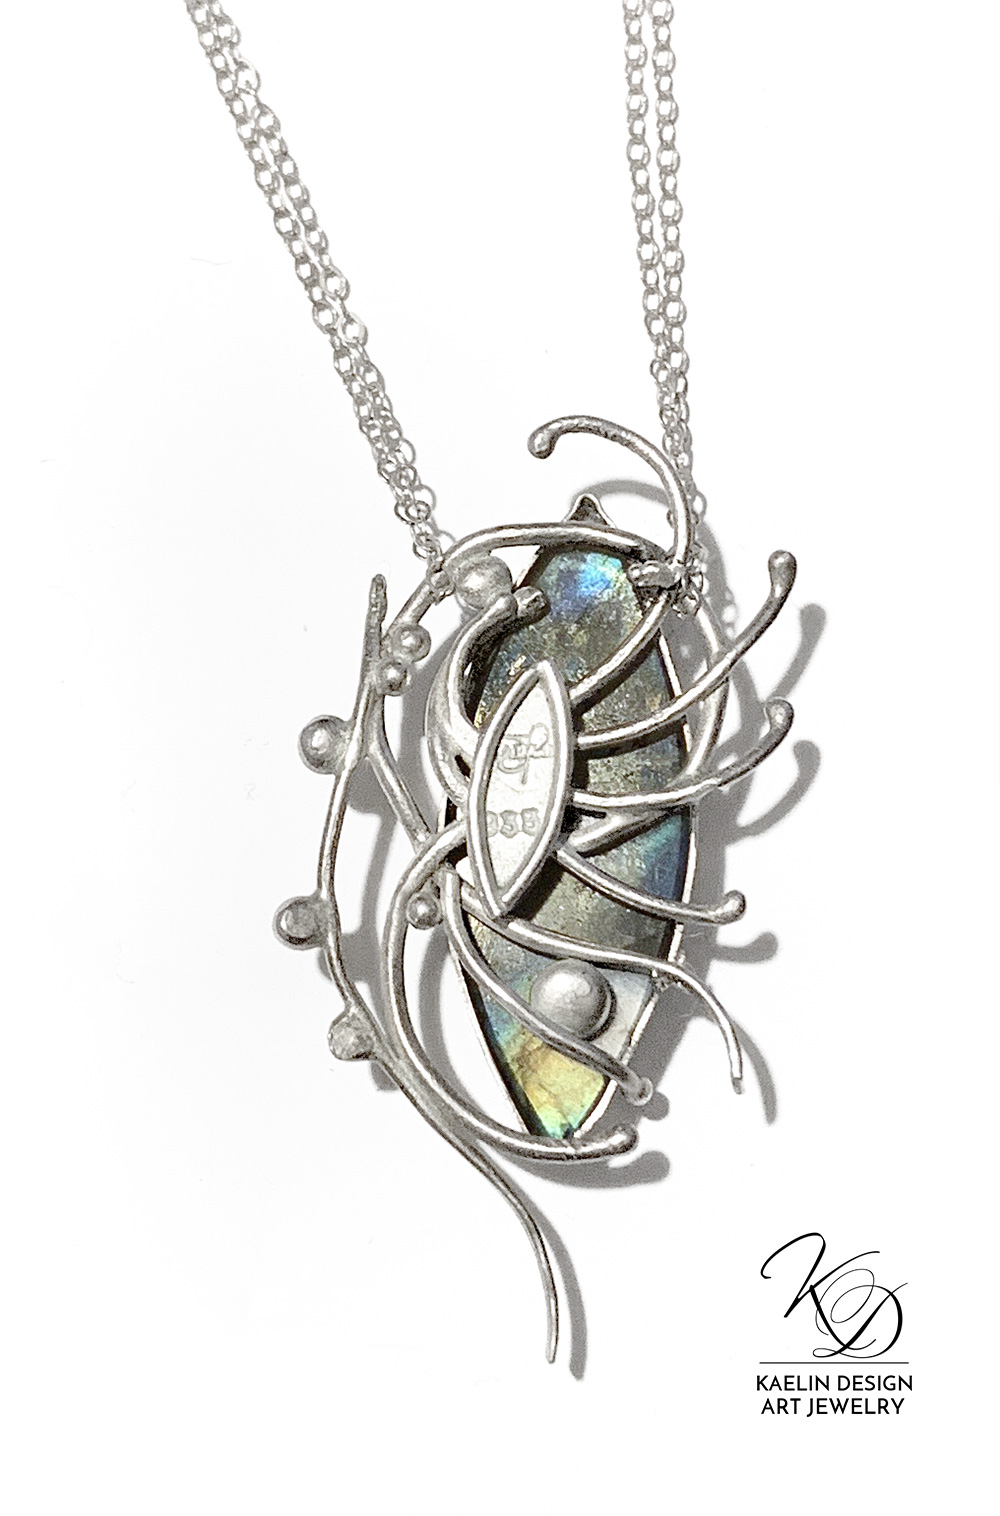 Briny Depths Hand Forged Silver and Labradorite Fine Art Jewelry Pendant